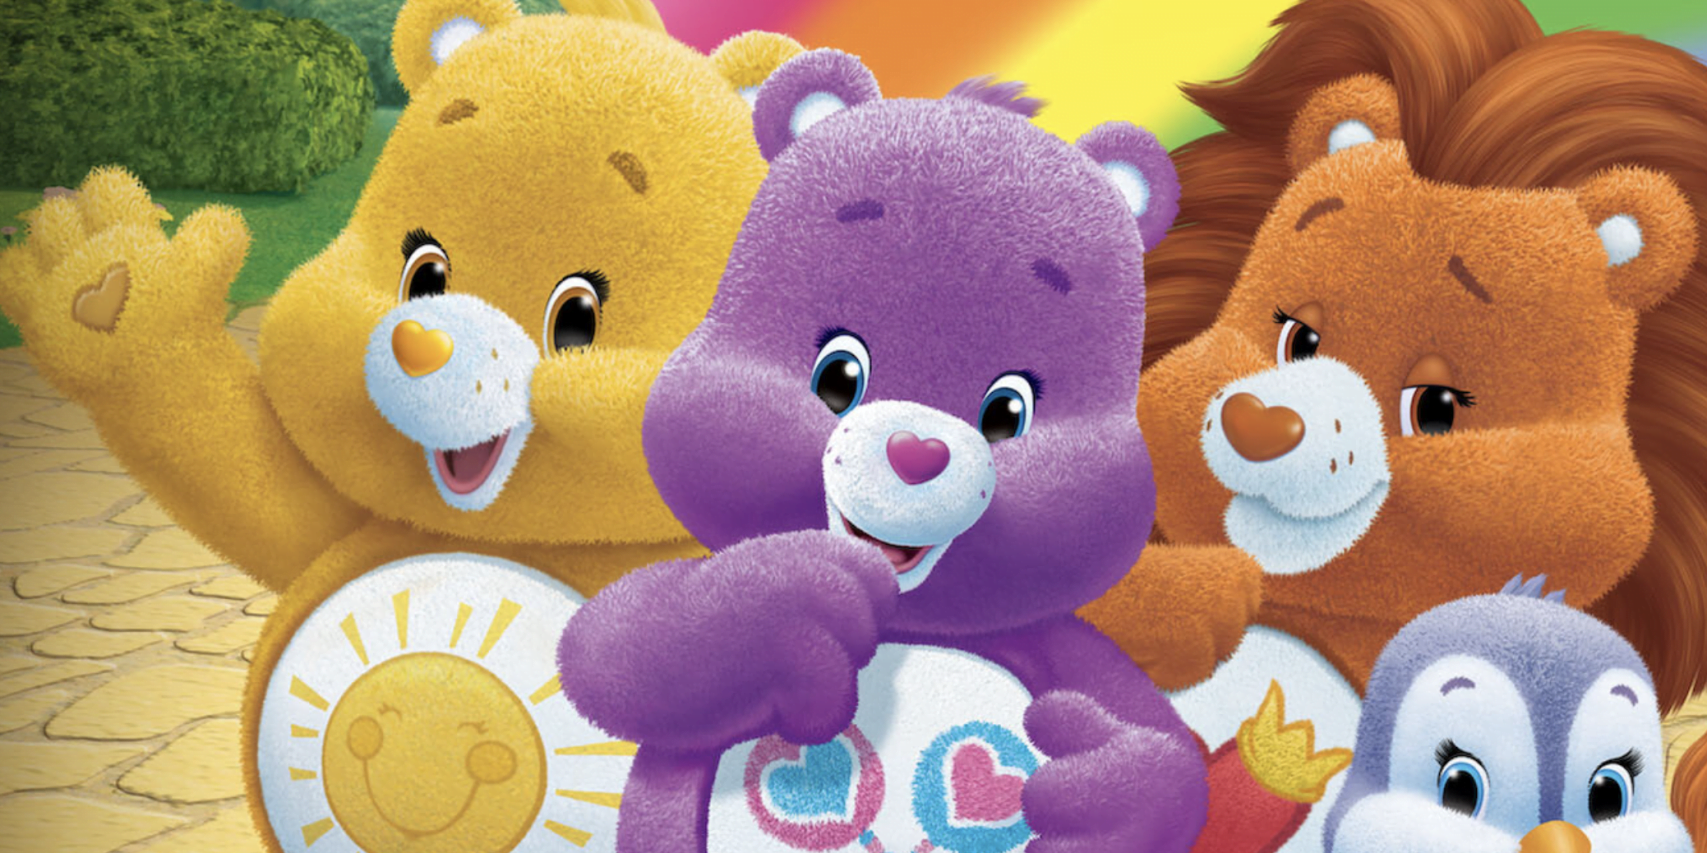 Private equity news canada IVEST buys Care Bears rights and do we Care? Yes we do!